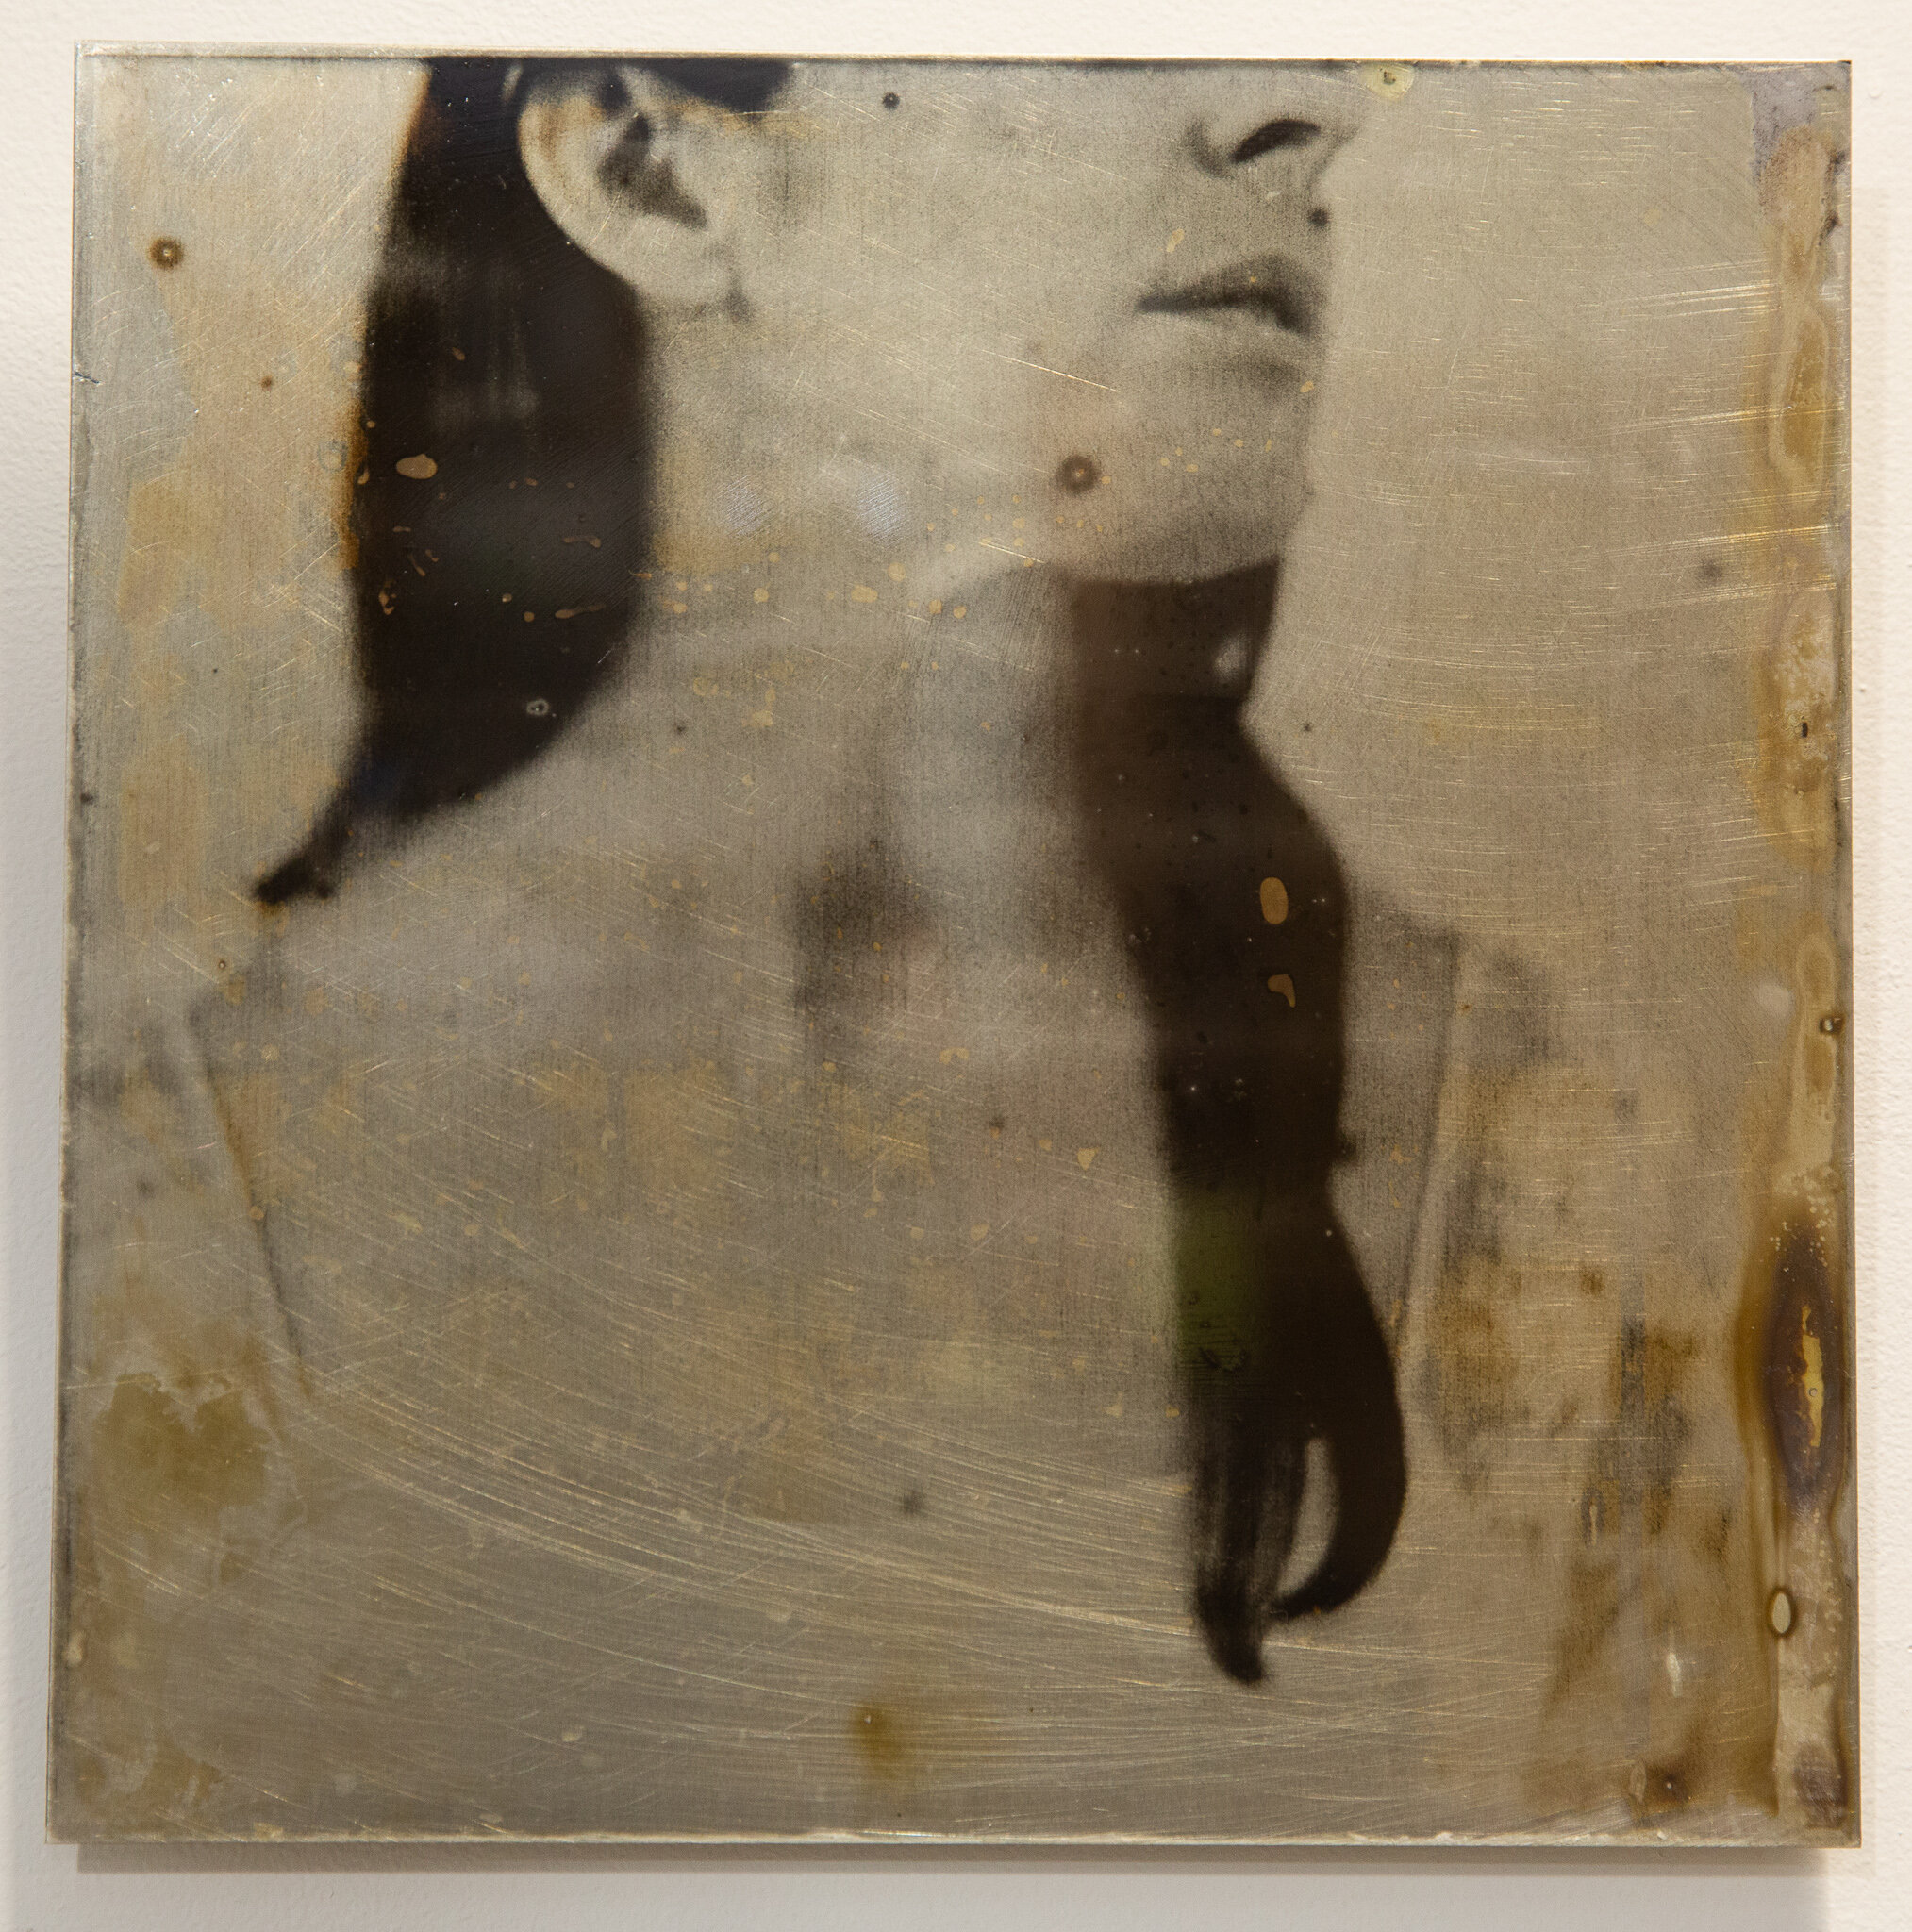   Untitled (photograph from the void) , 2020 Liquid emulsion on found steel plates, 12x12 inches 